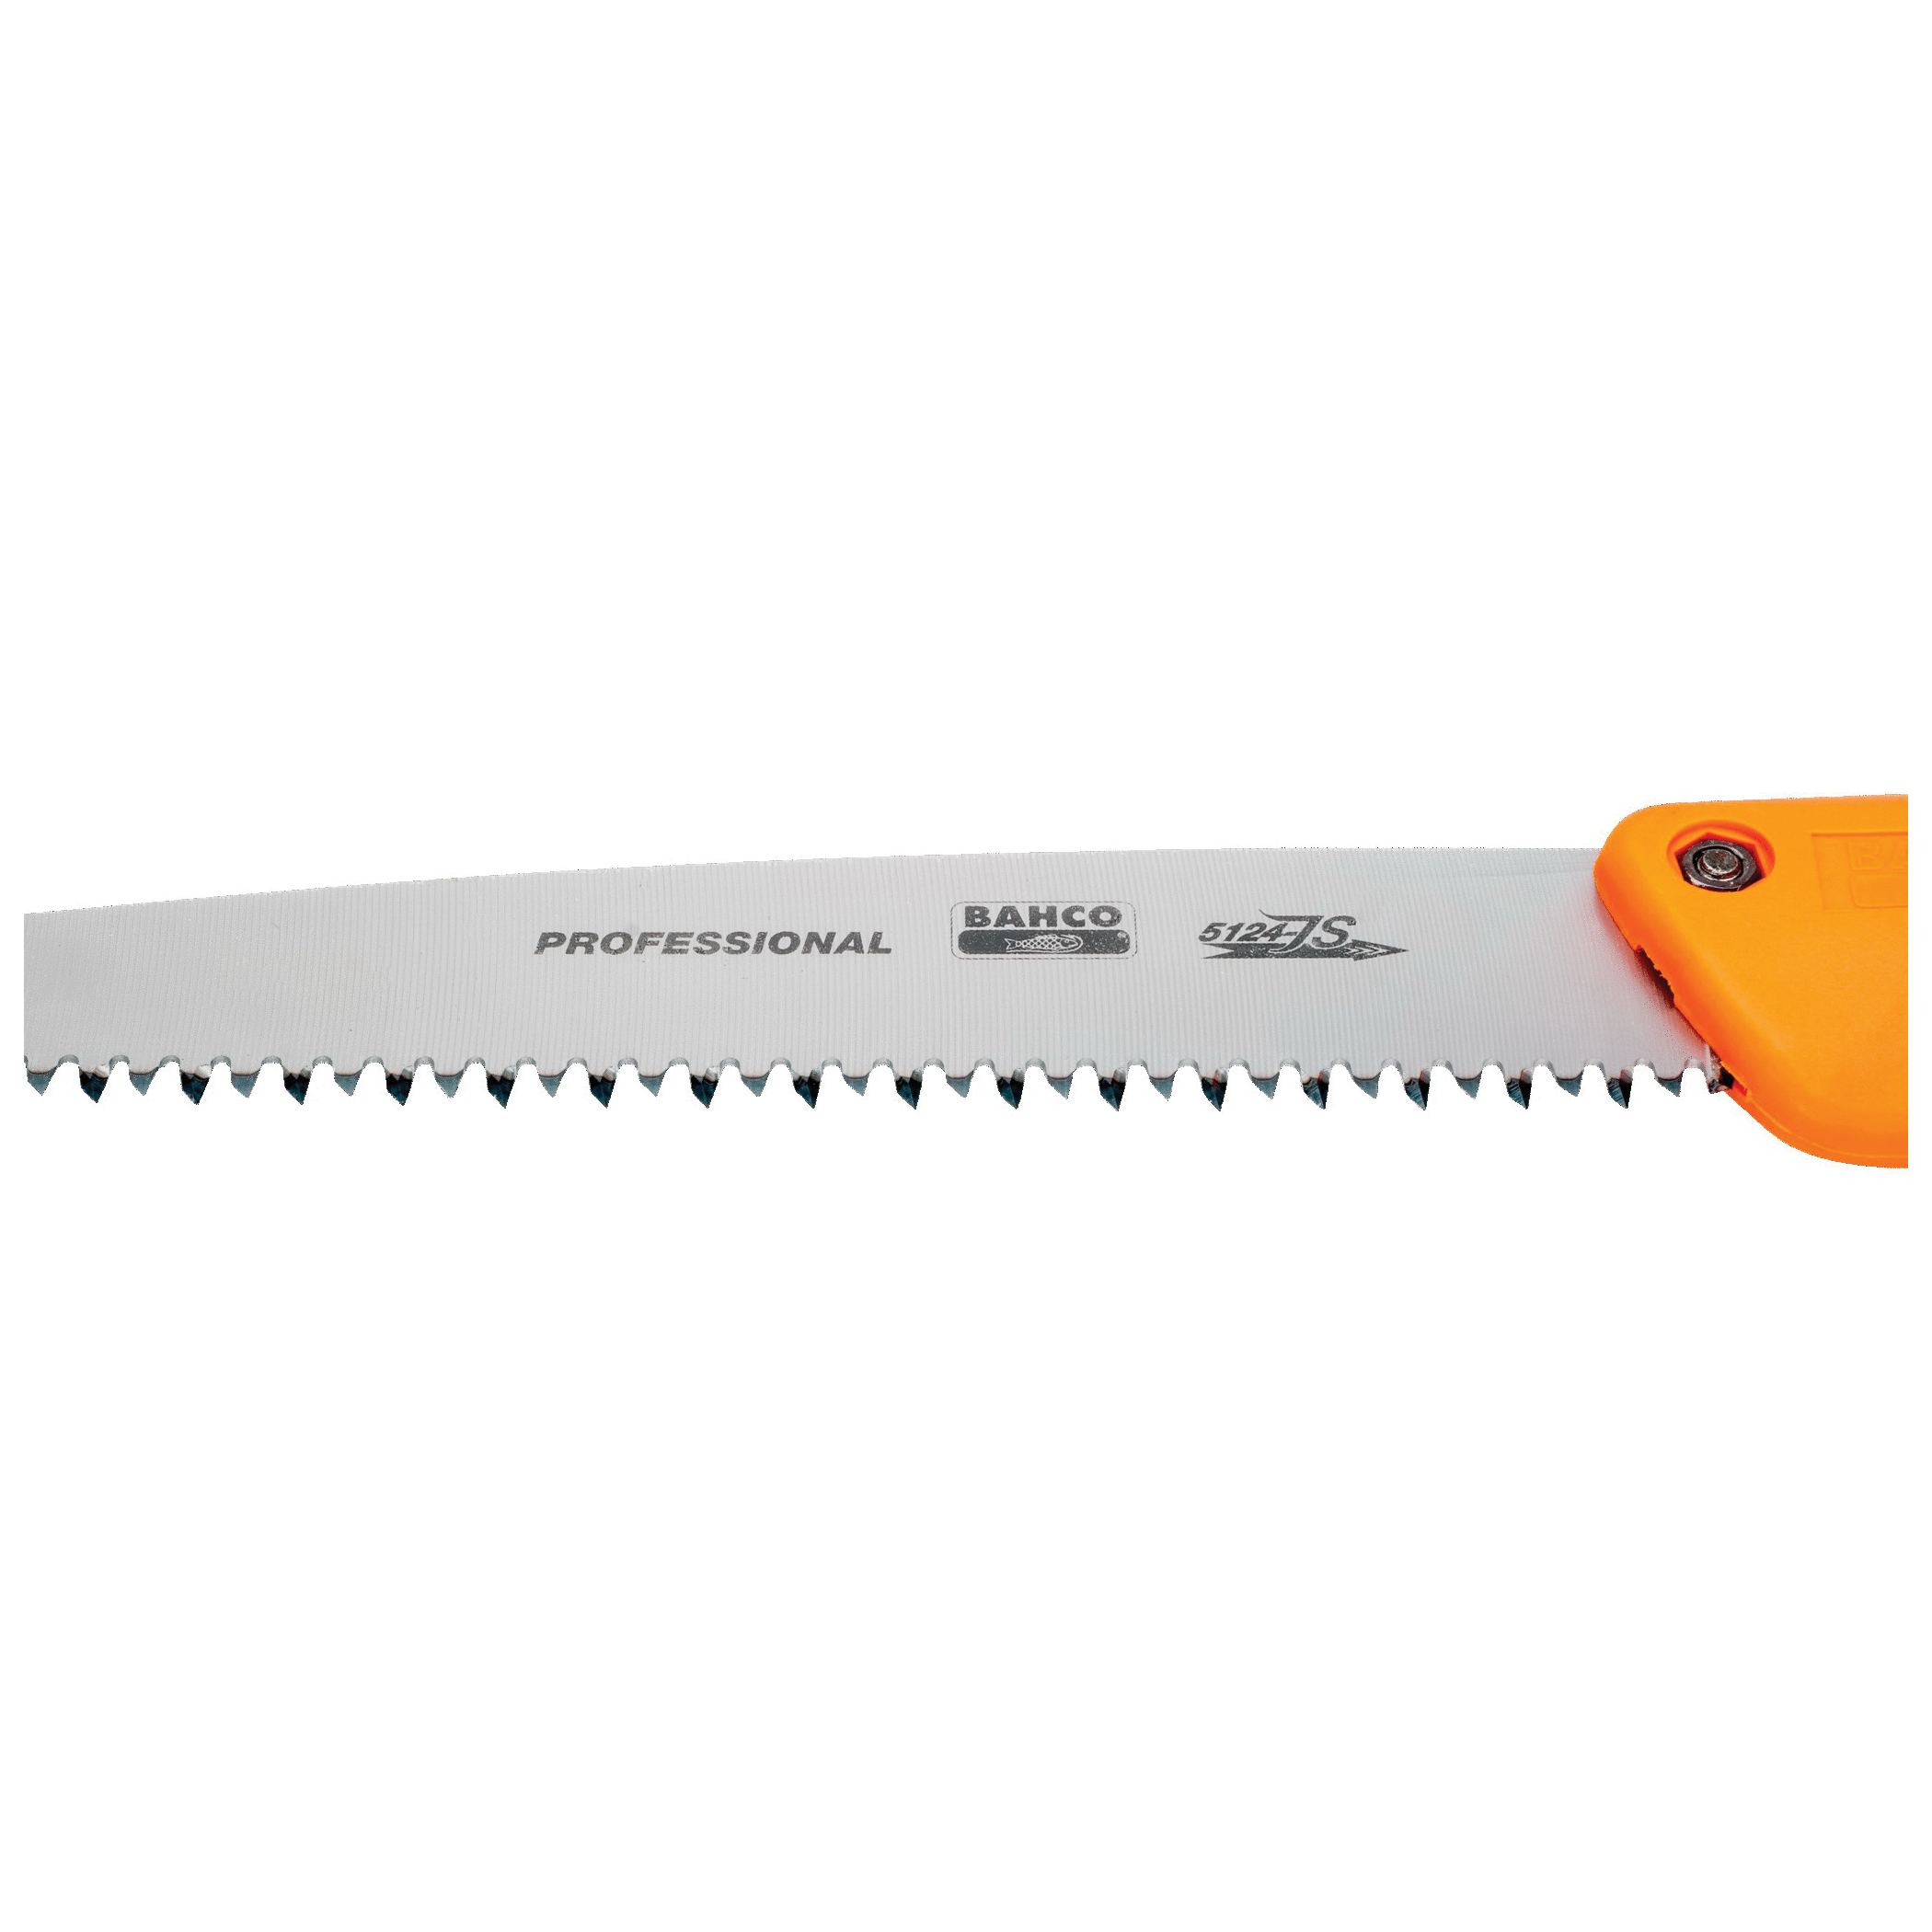 Bahco 5124-JS-H Pruning Saw with 2-Component Handle, 9-1/2 in Blade, 5 TPI, Comfort-Grip Handle - 3